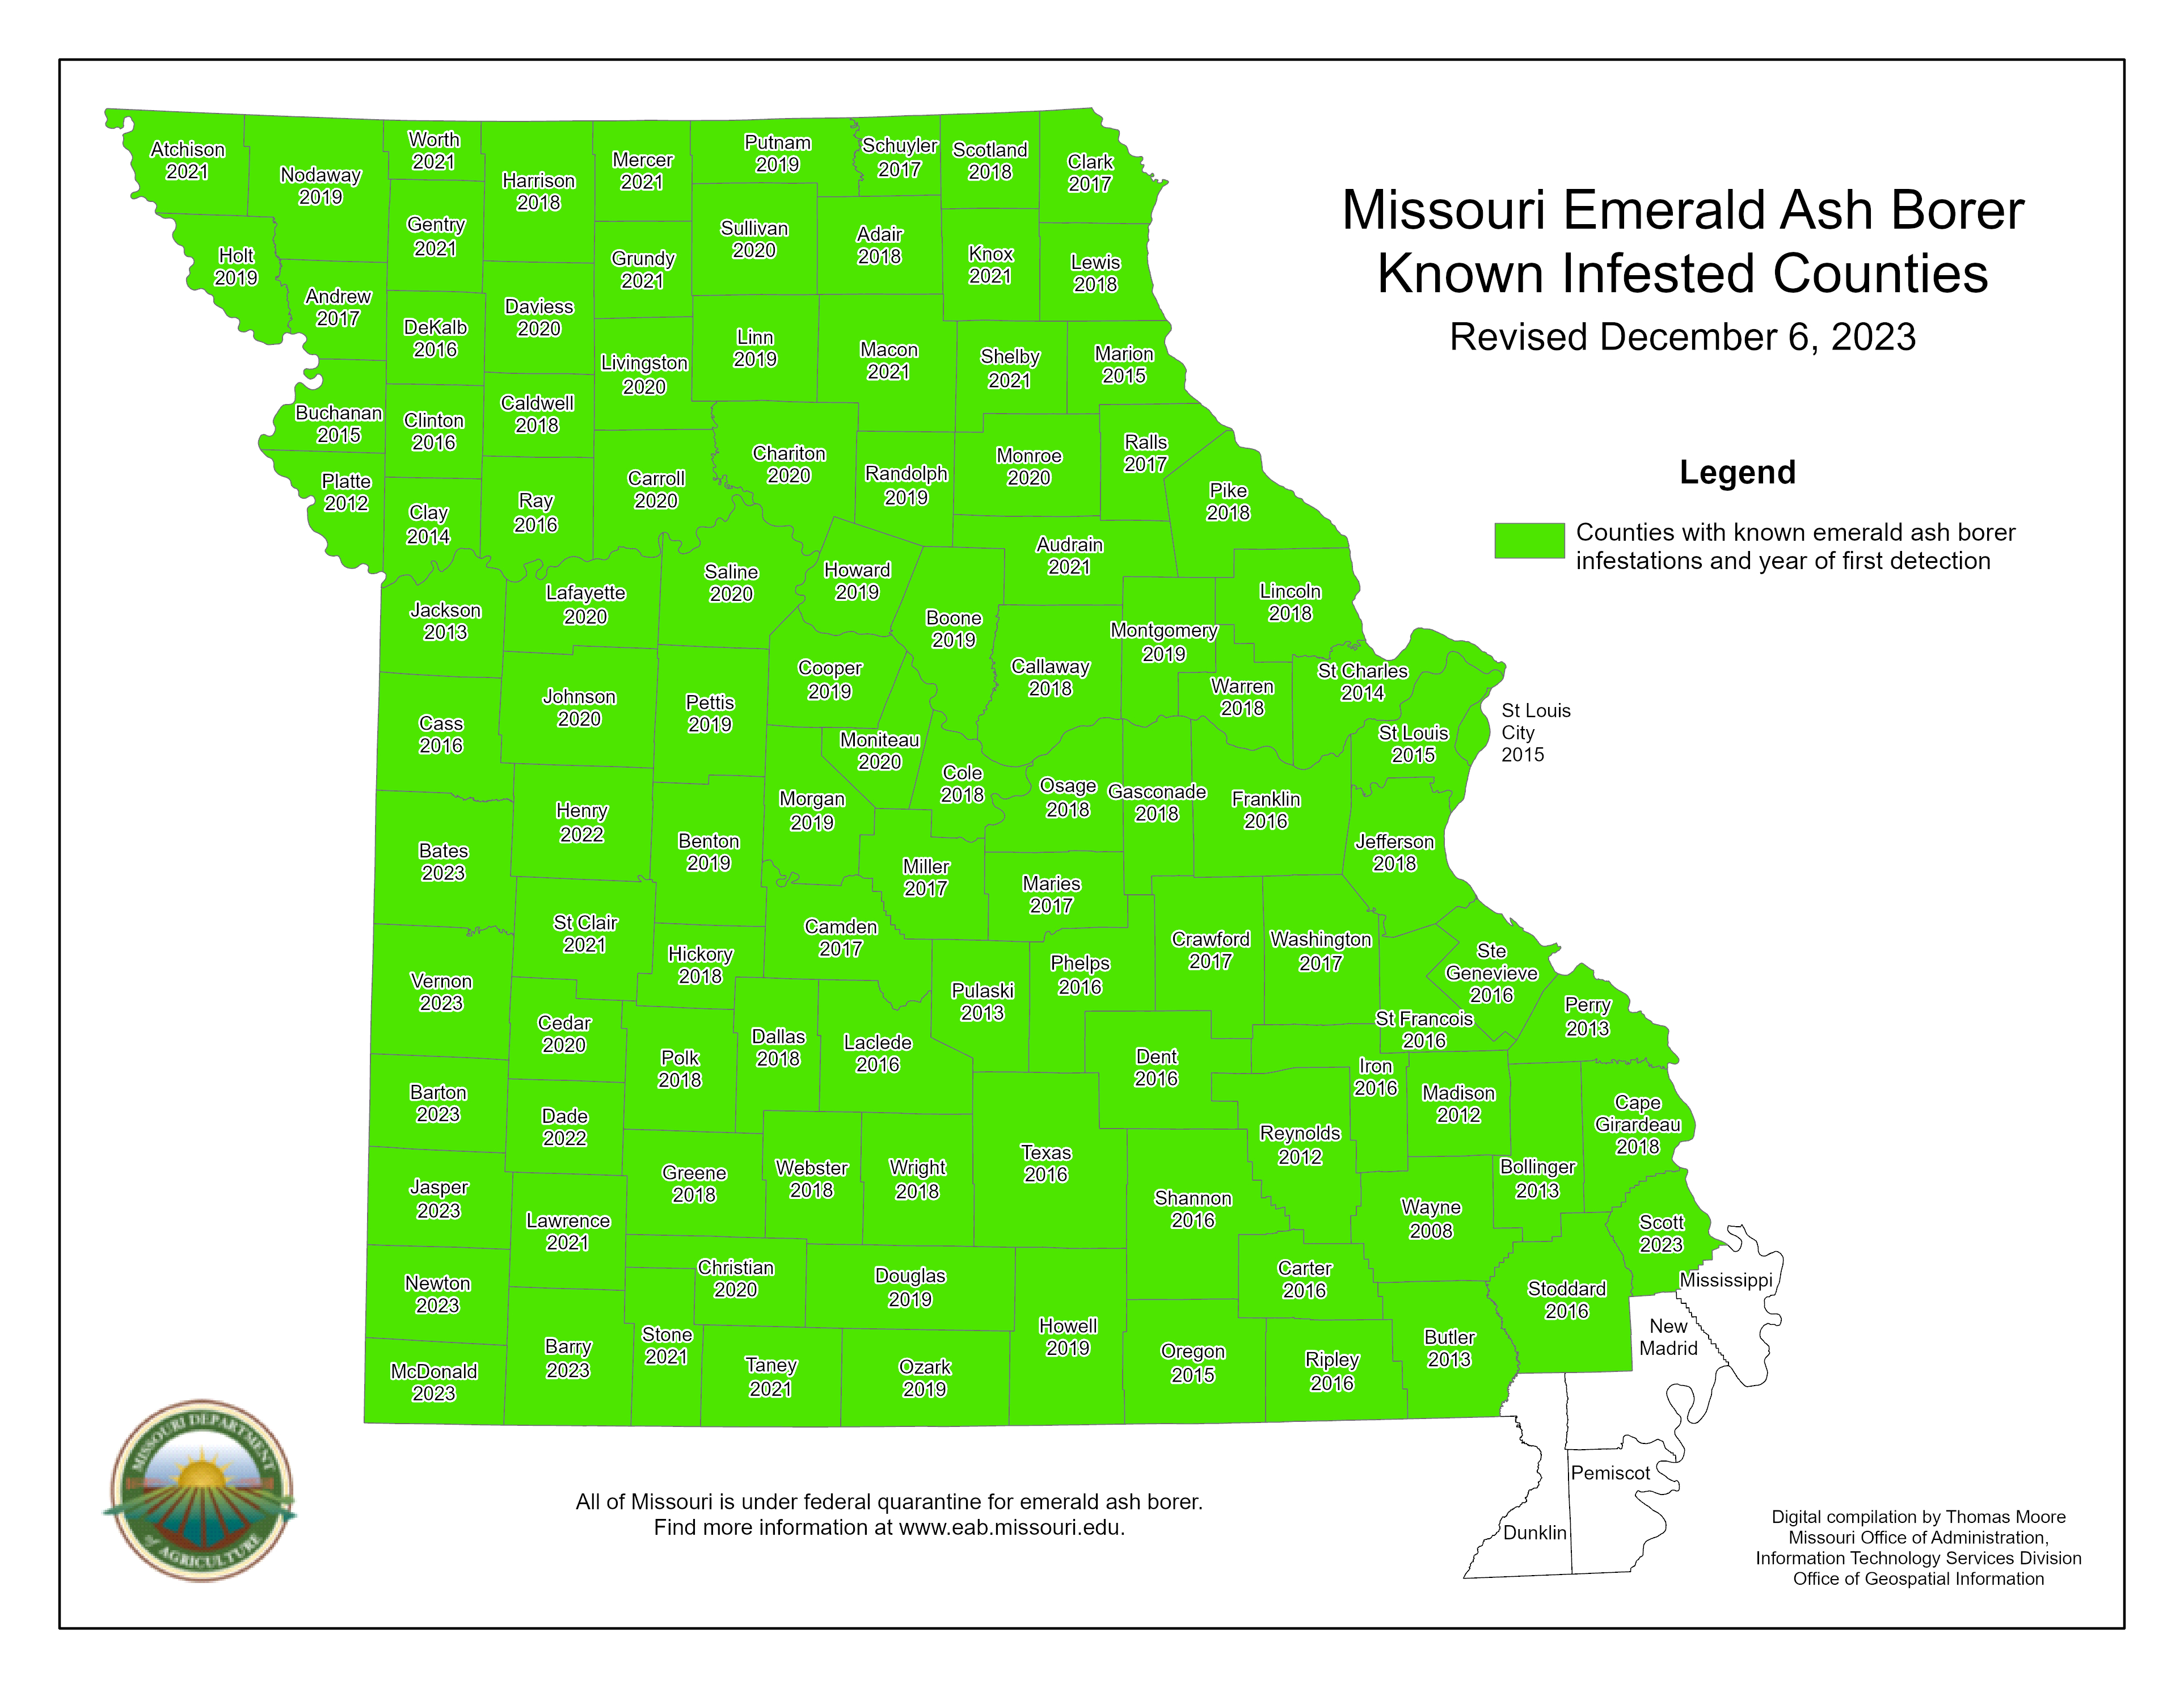 Missouri Emerald Ash Borer Known Infested Counties Map